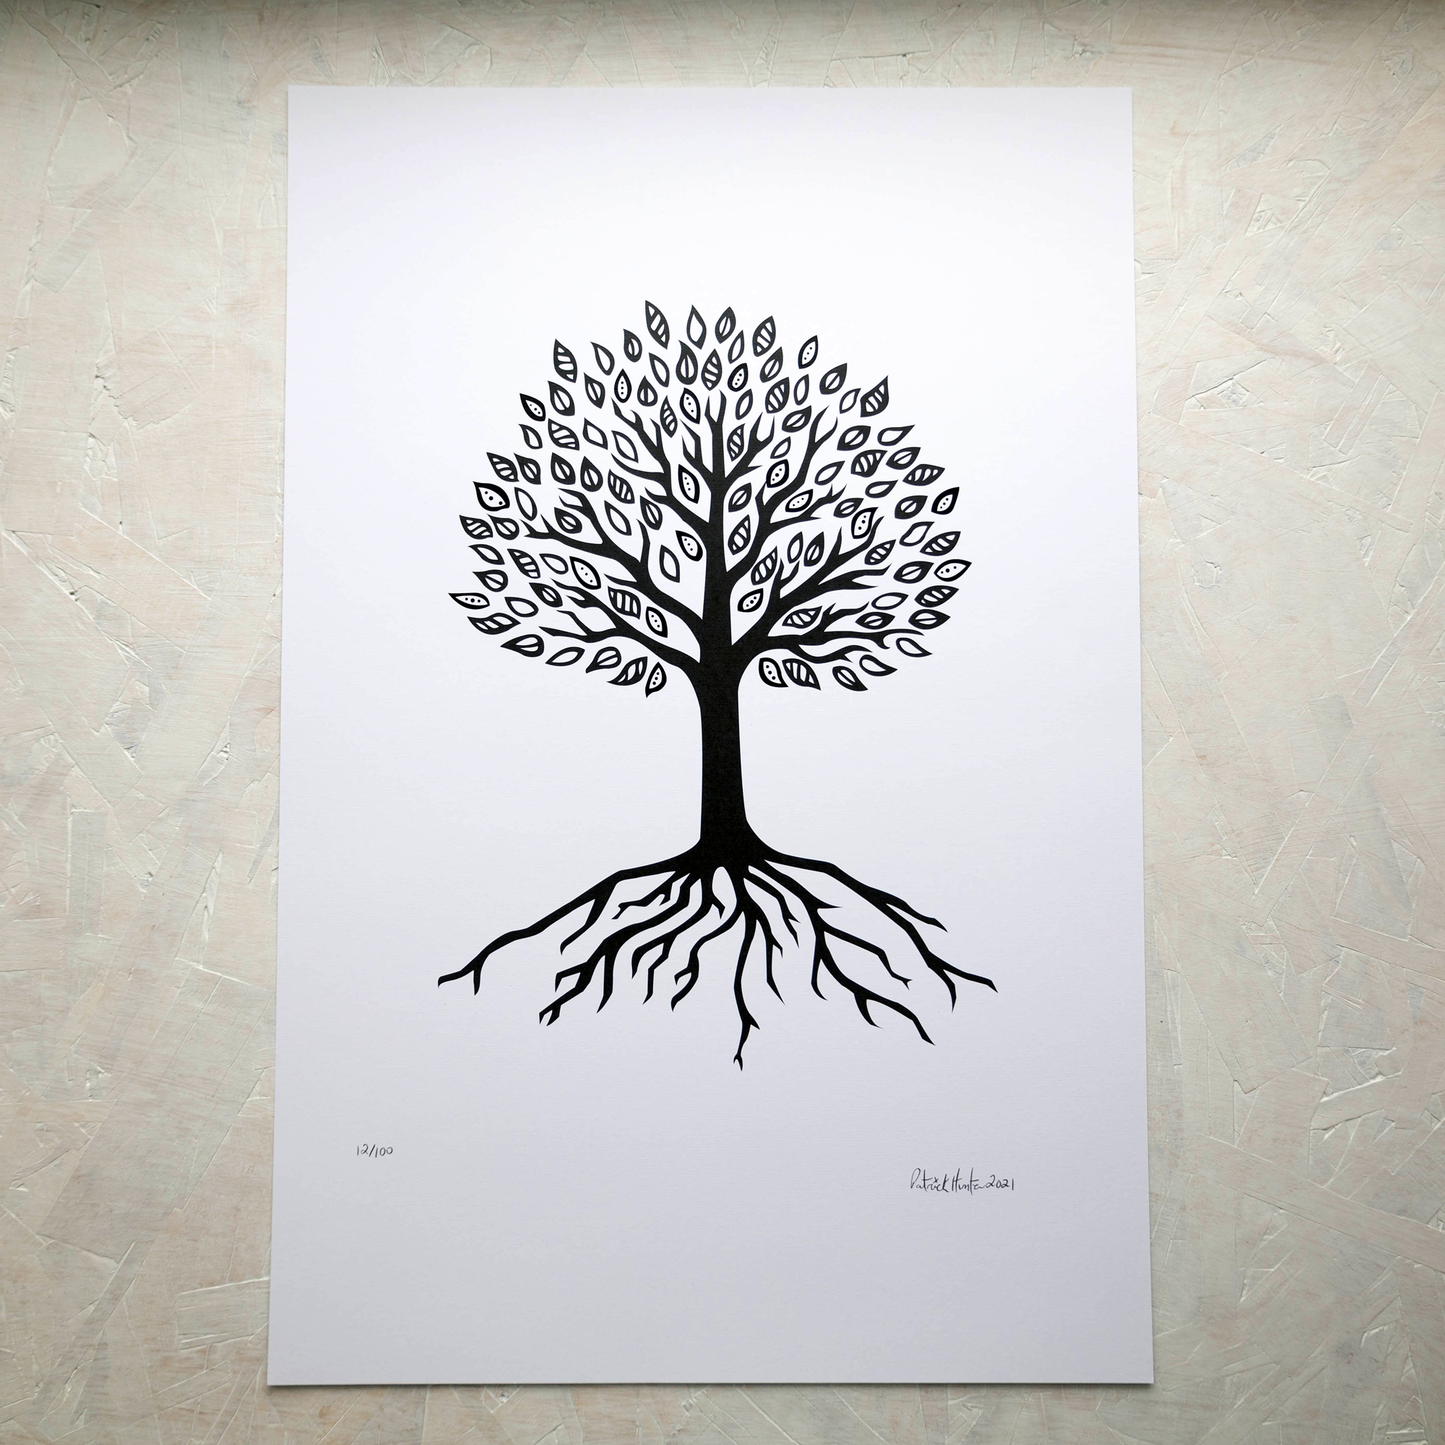 Print of Patrick Hunter's painting of a simplified tree of life, black on white in portrait orientation, woodland art style.